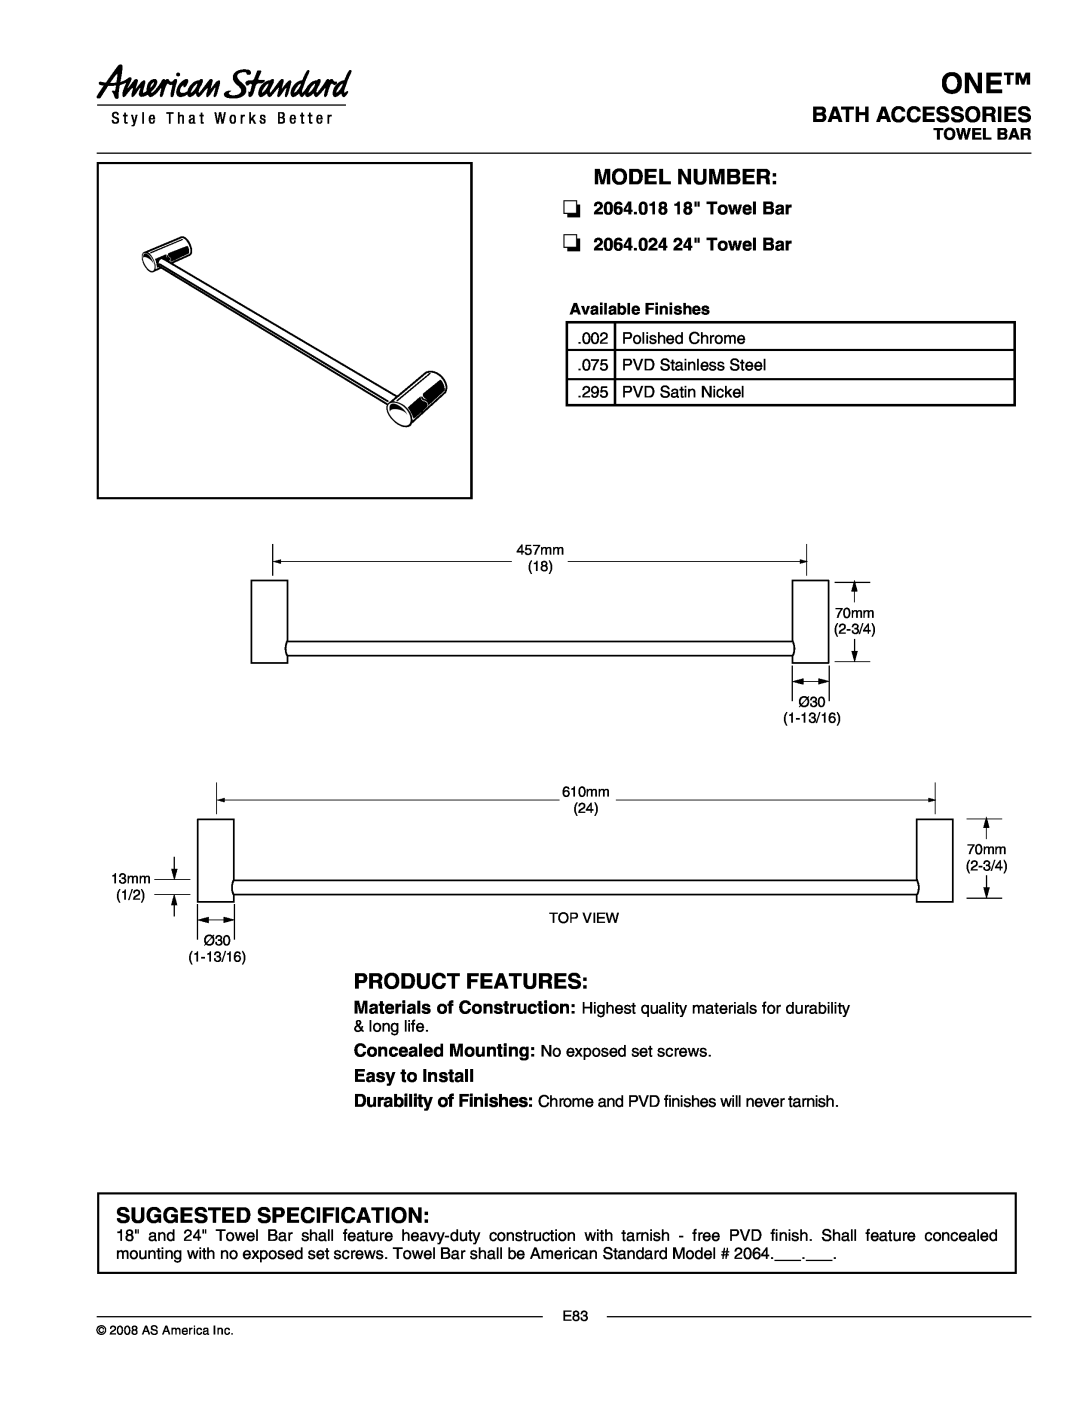 American Standard 2064.024 manual Bath Accessories, Model Number, Product Features, Suggested Specification, Towel Bar 